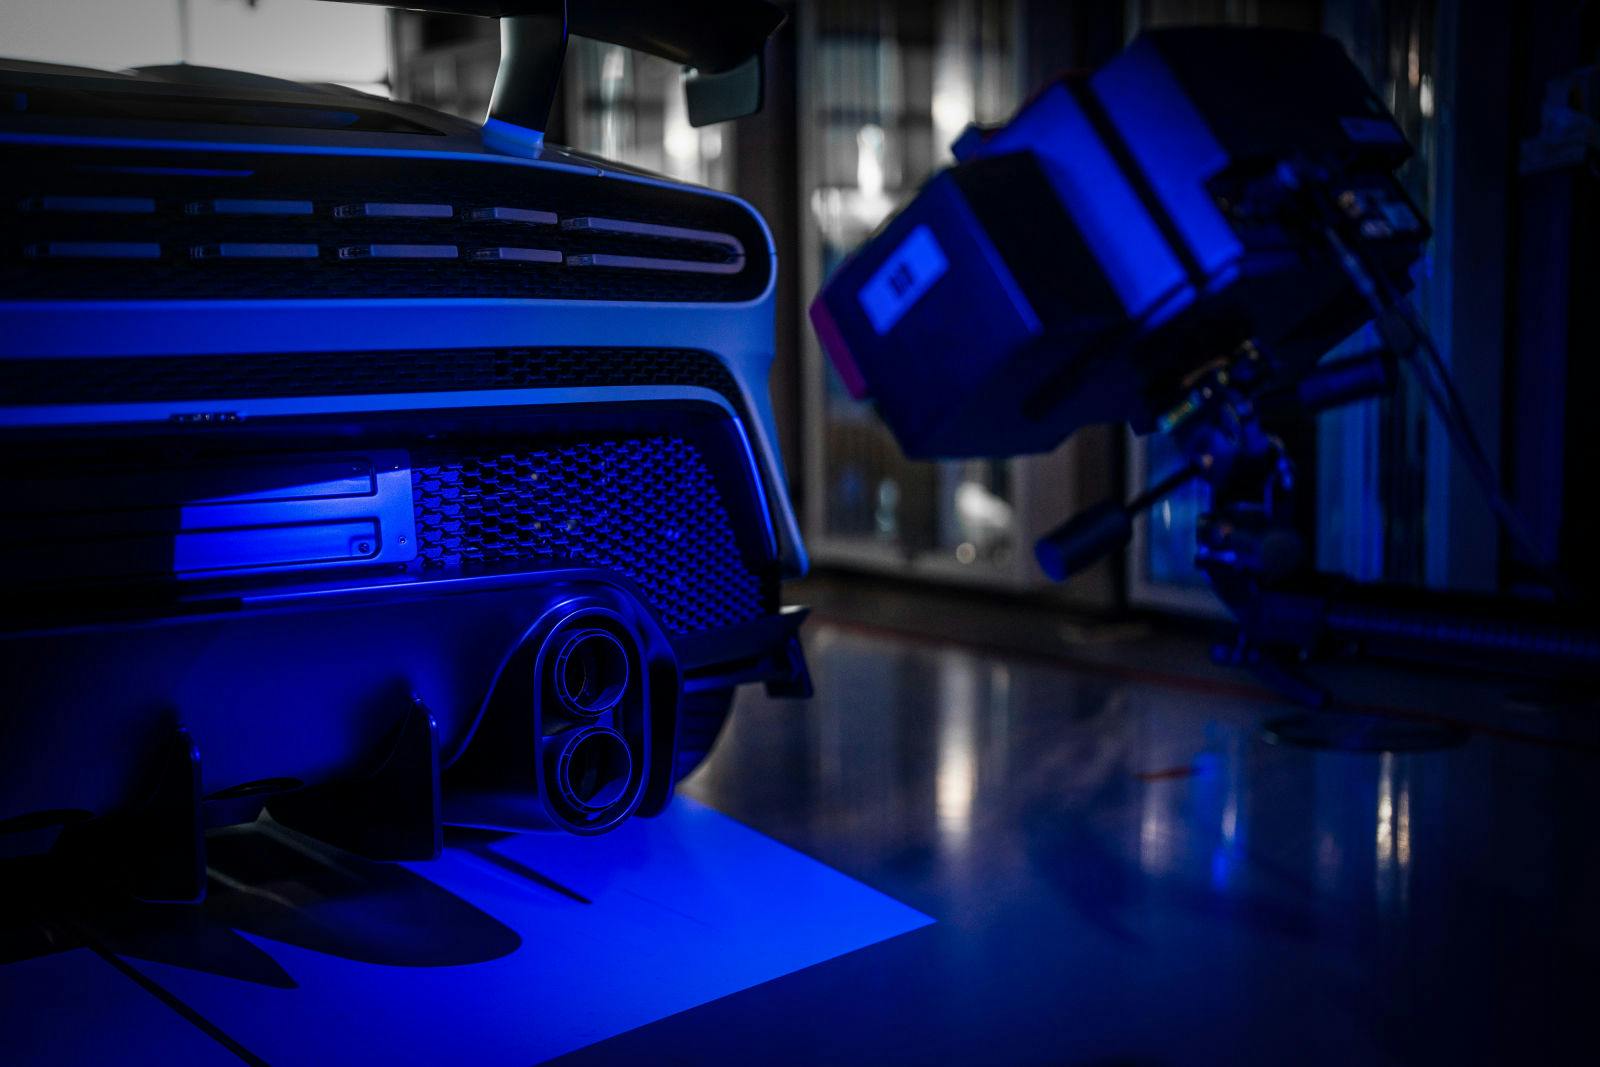 The 3D scanner analyzes the 3D printed titanium trim covers of the Bugatti Centodieci.